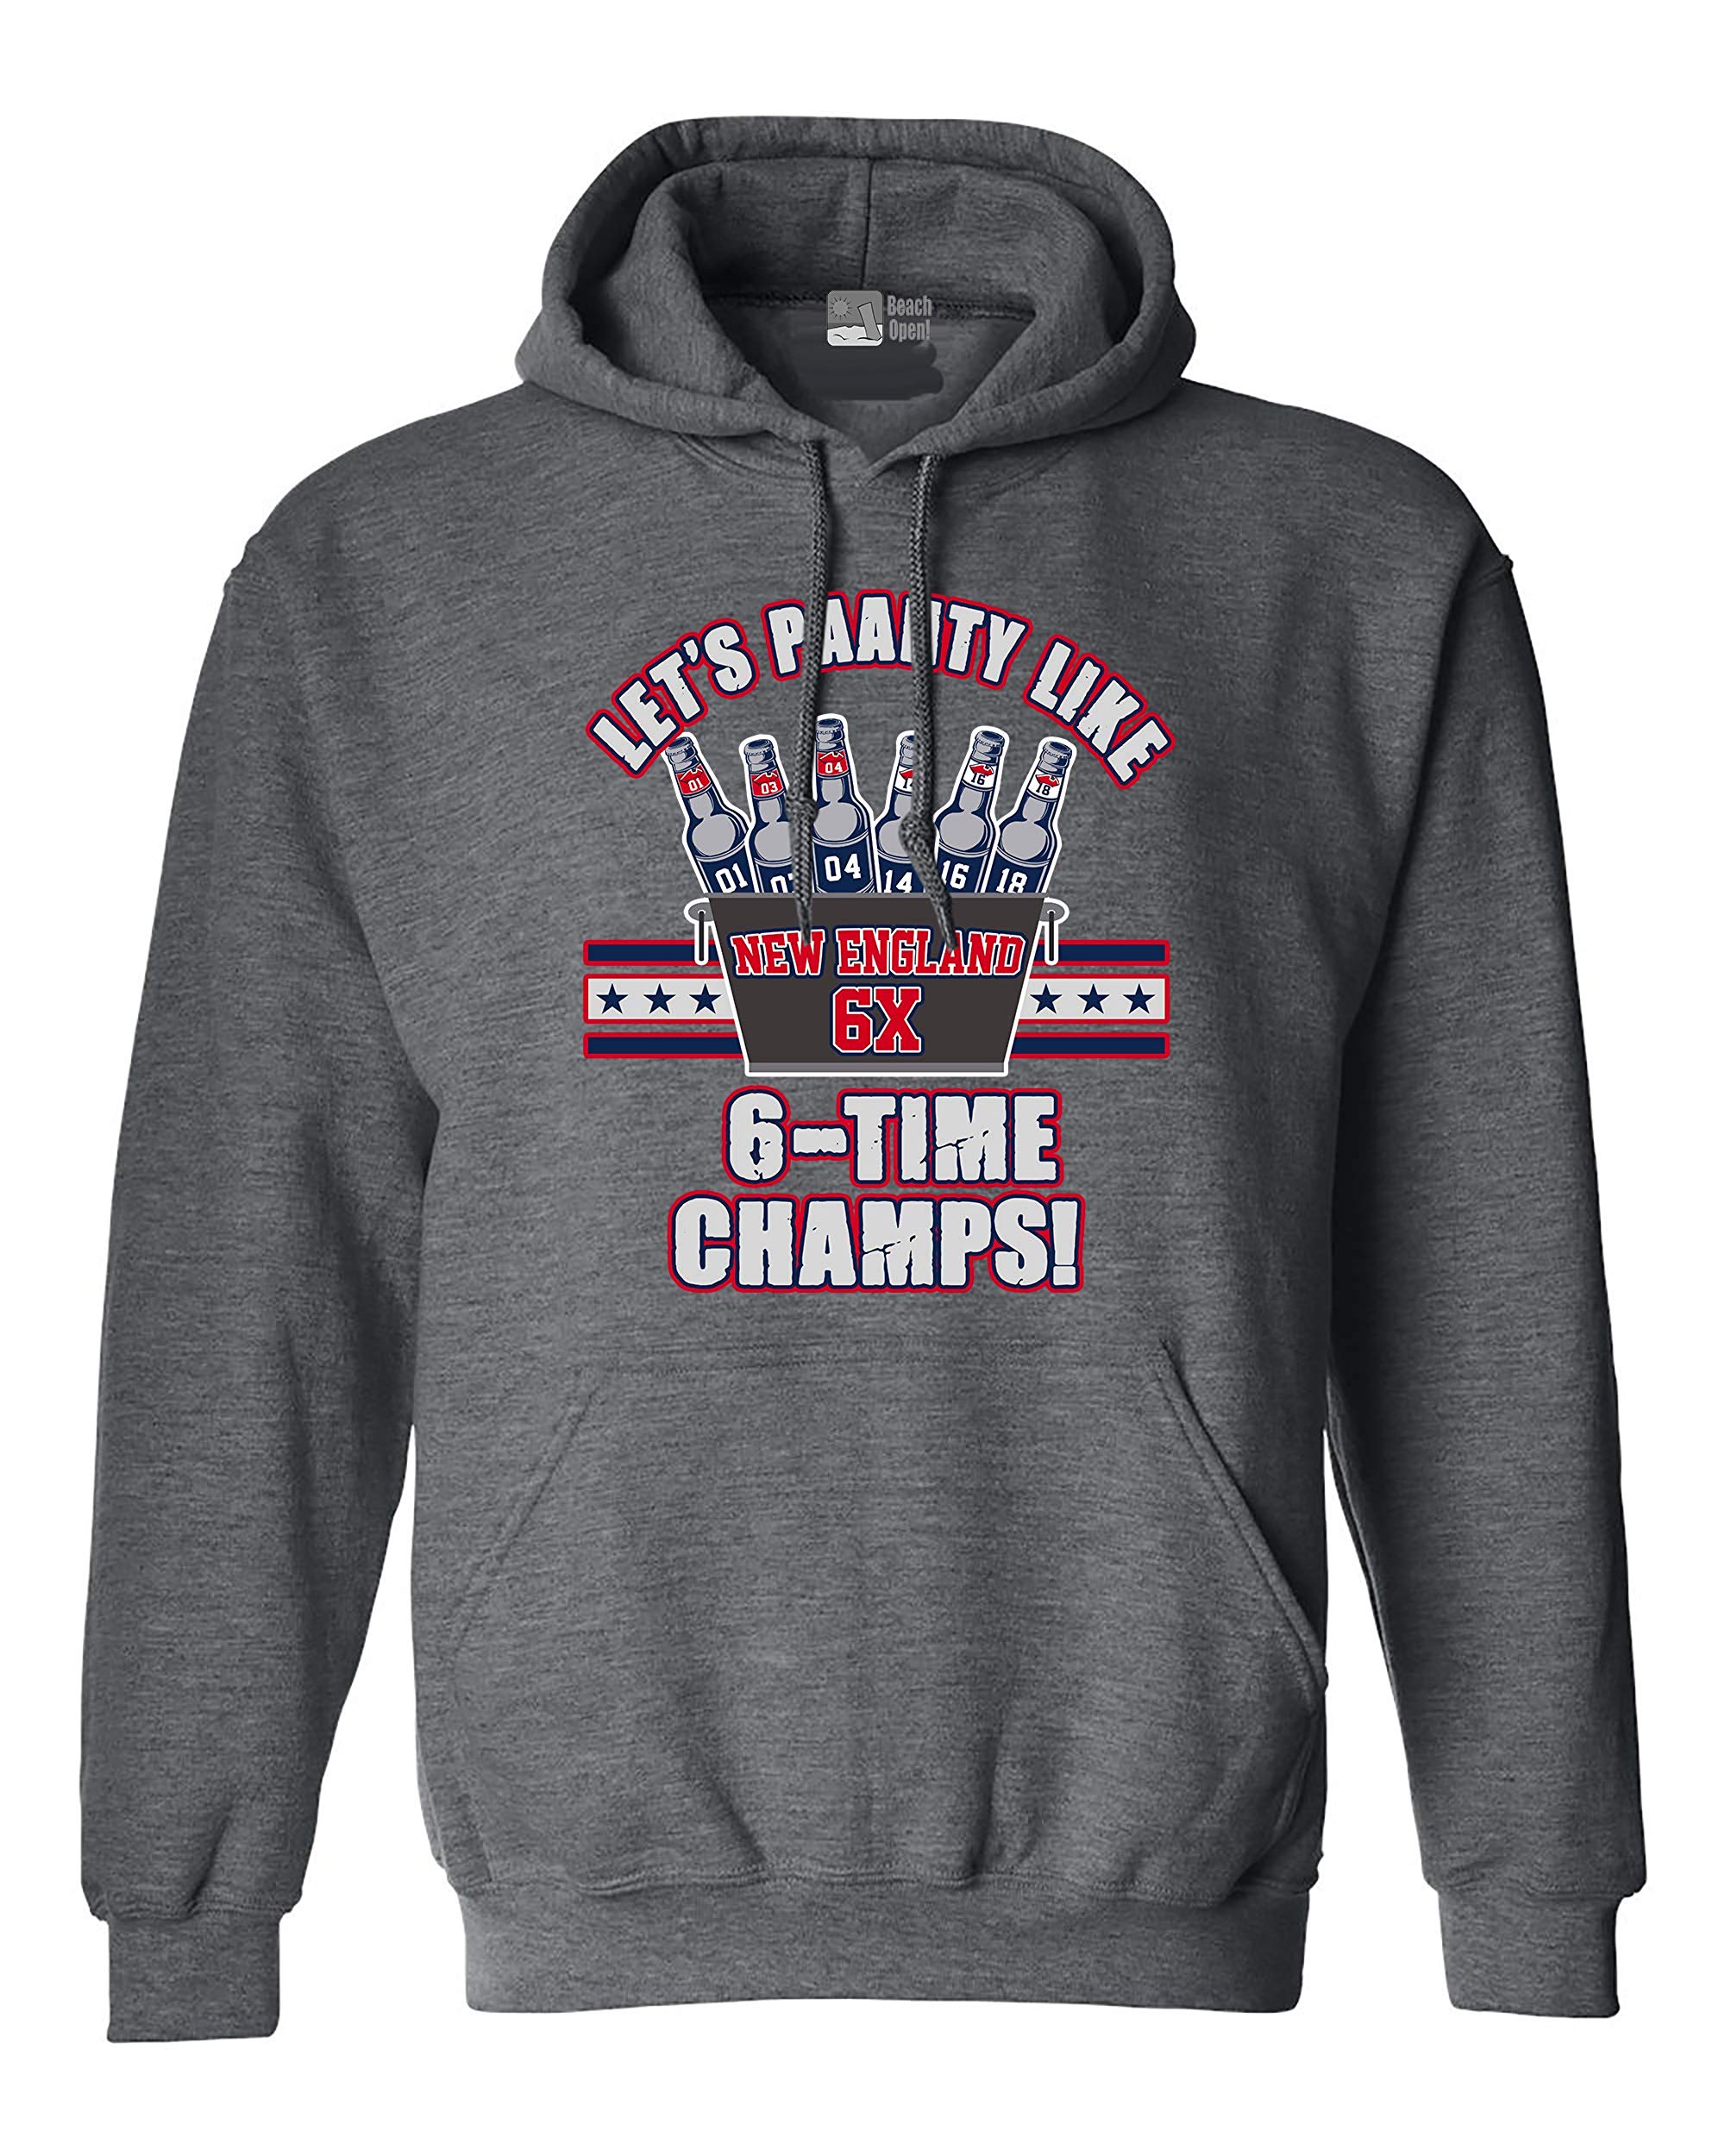 Let's Paahty Like 6-Time Champs New England Football DT Sweatshirt Hoodie - image 1 of 2